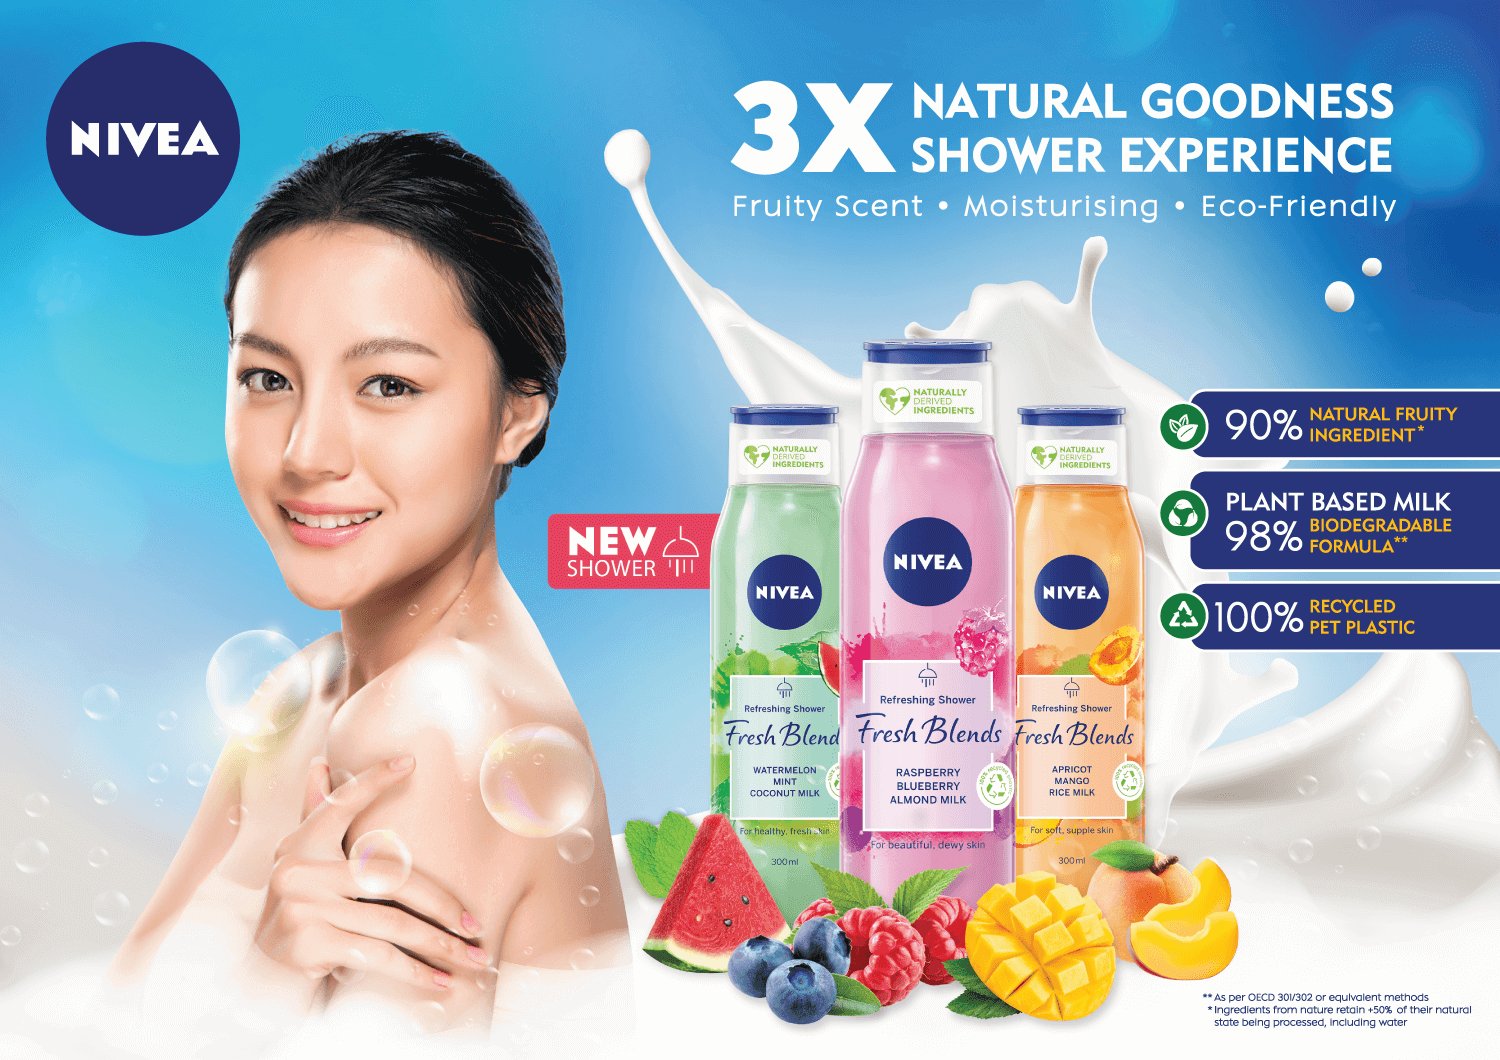 nivea 3x natural goodness shower experience